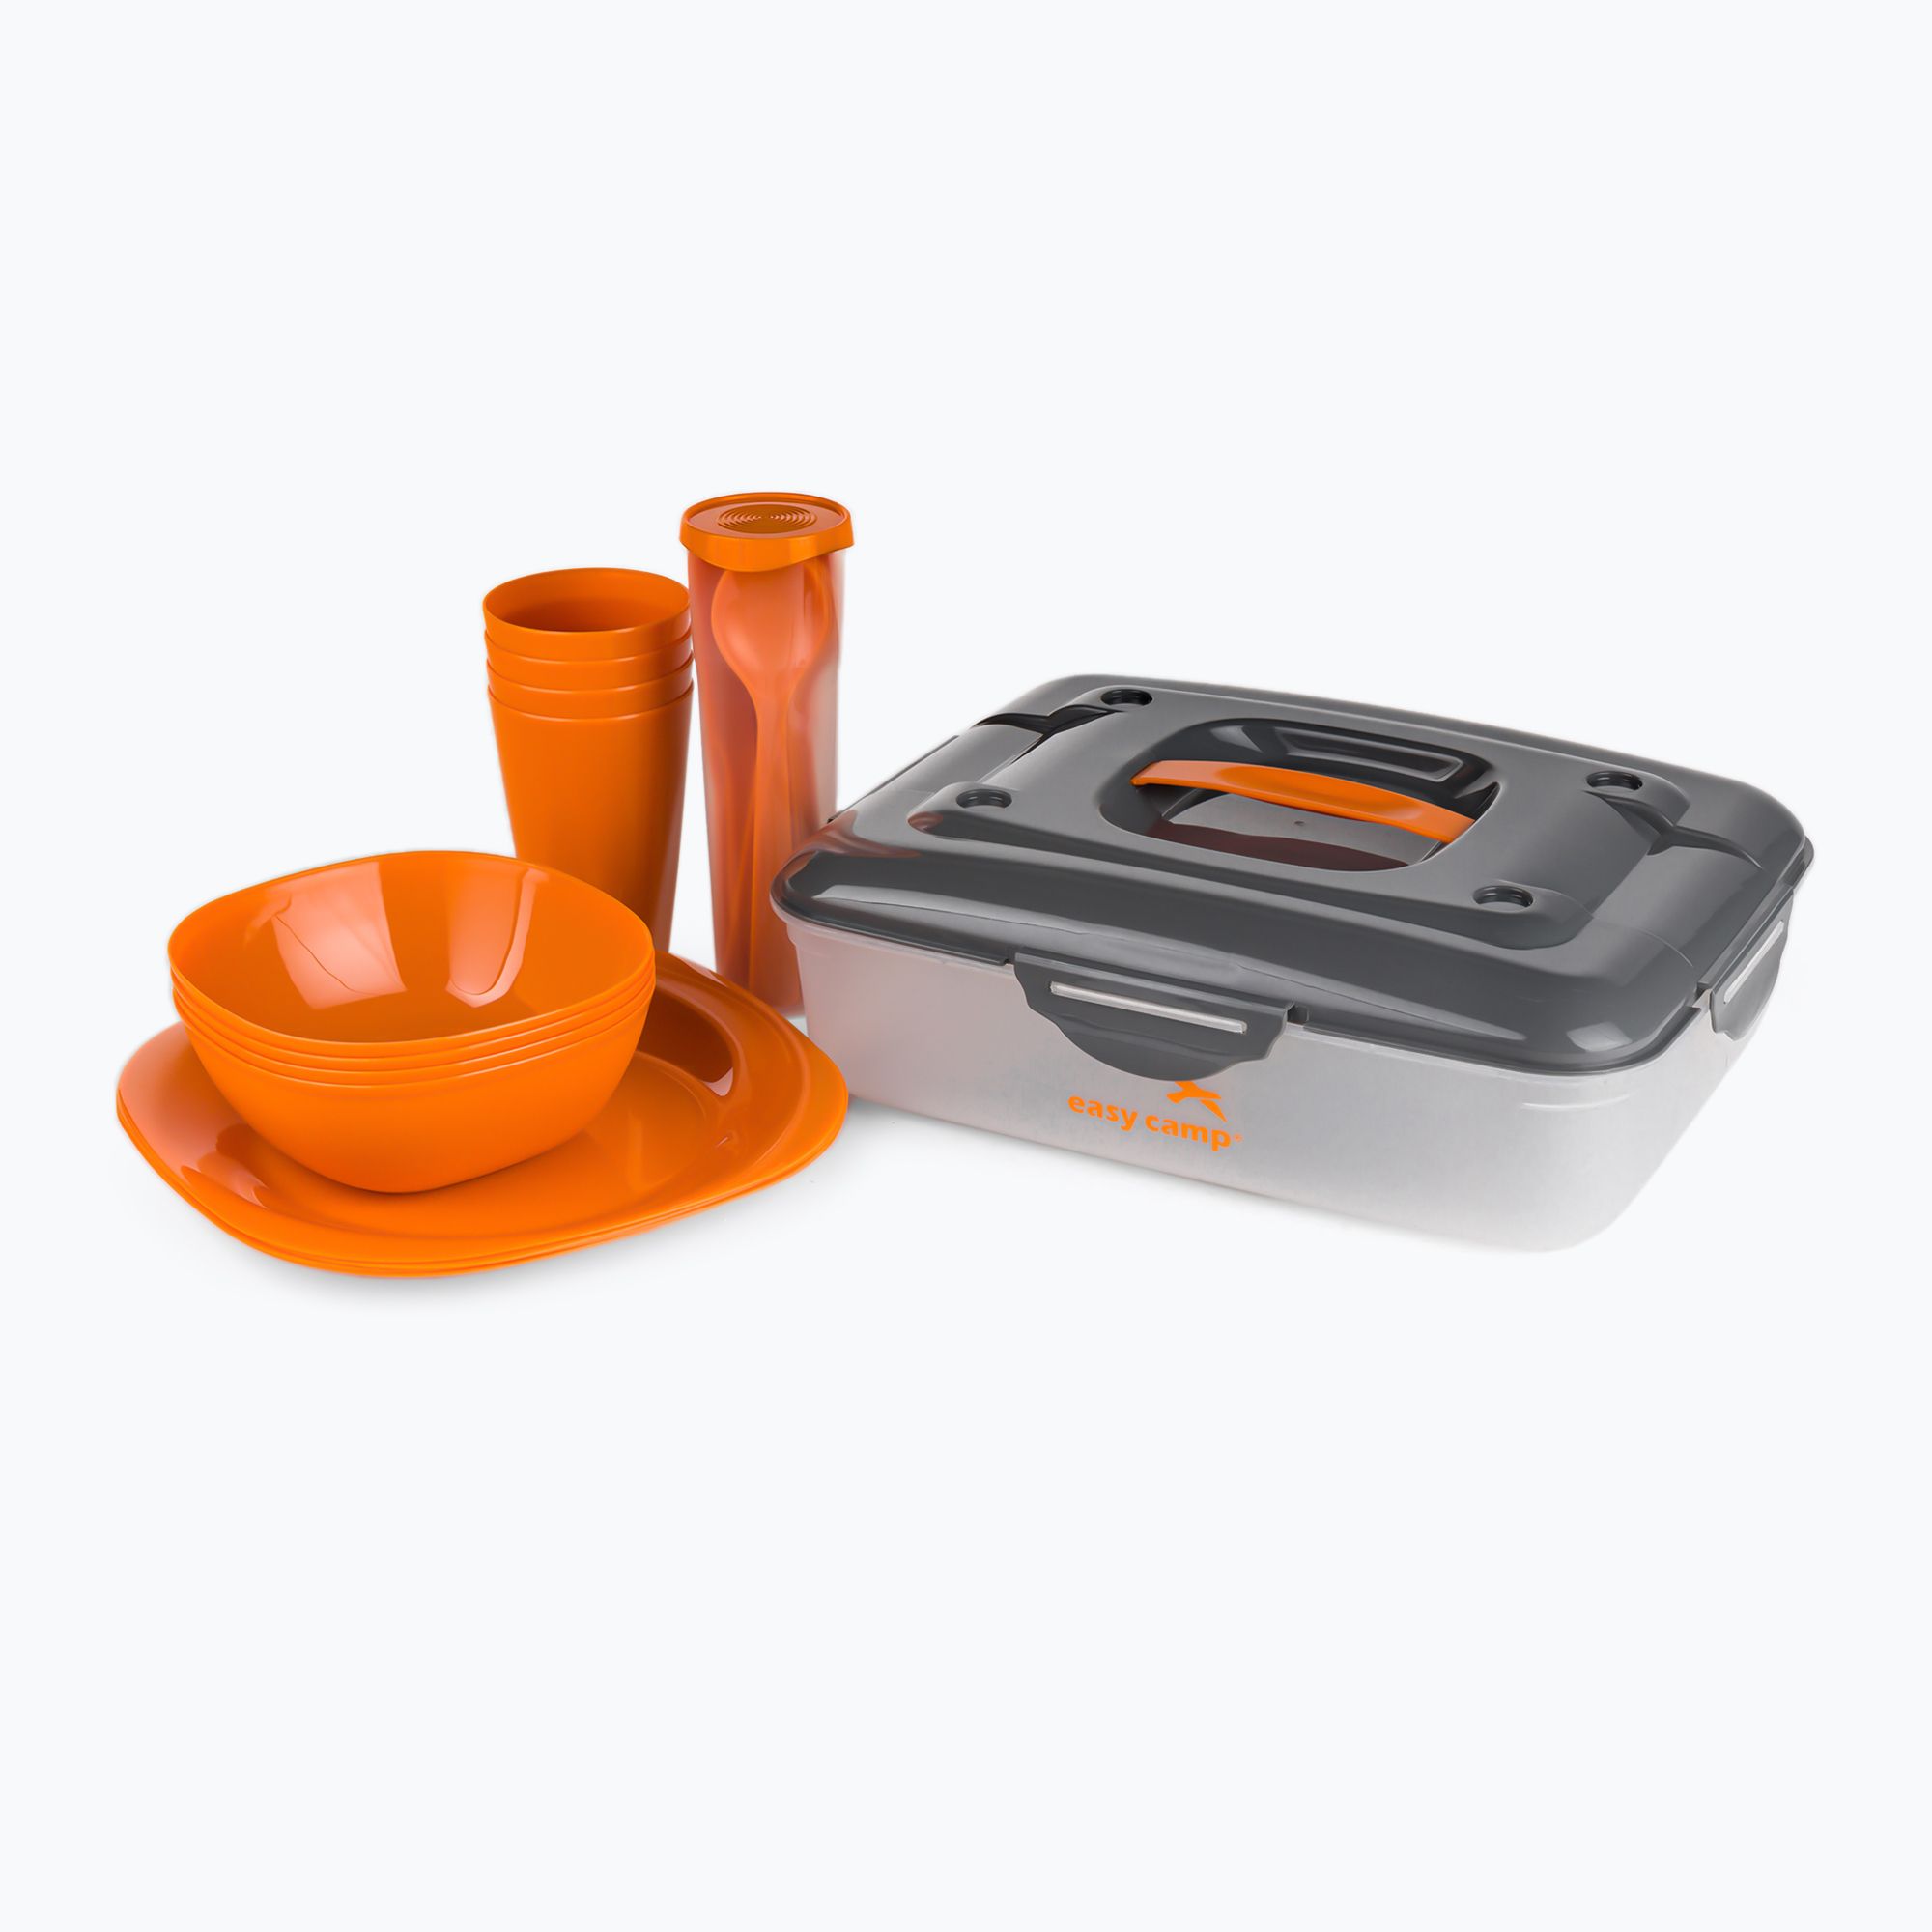 Camp Cerf Persons hiking Easy Box 680162 4 orange Picnic set cookware